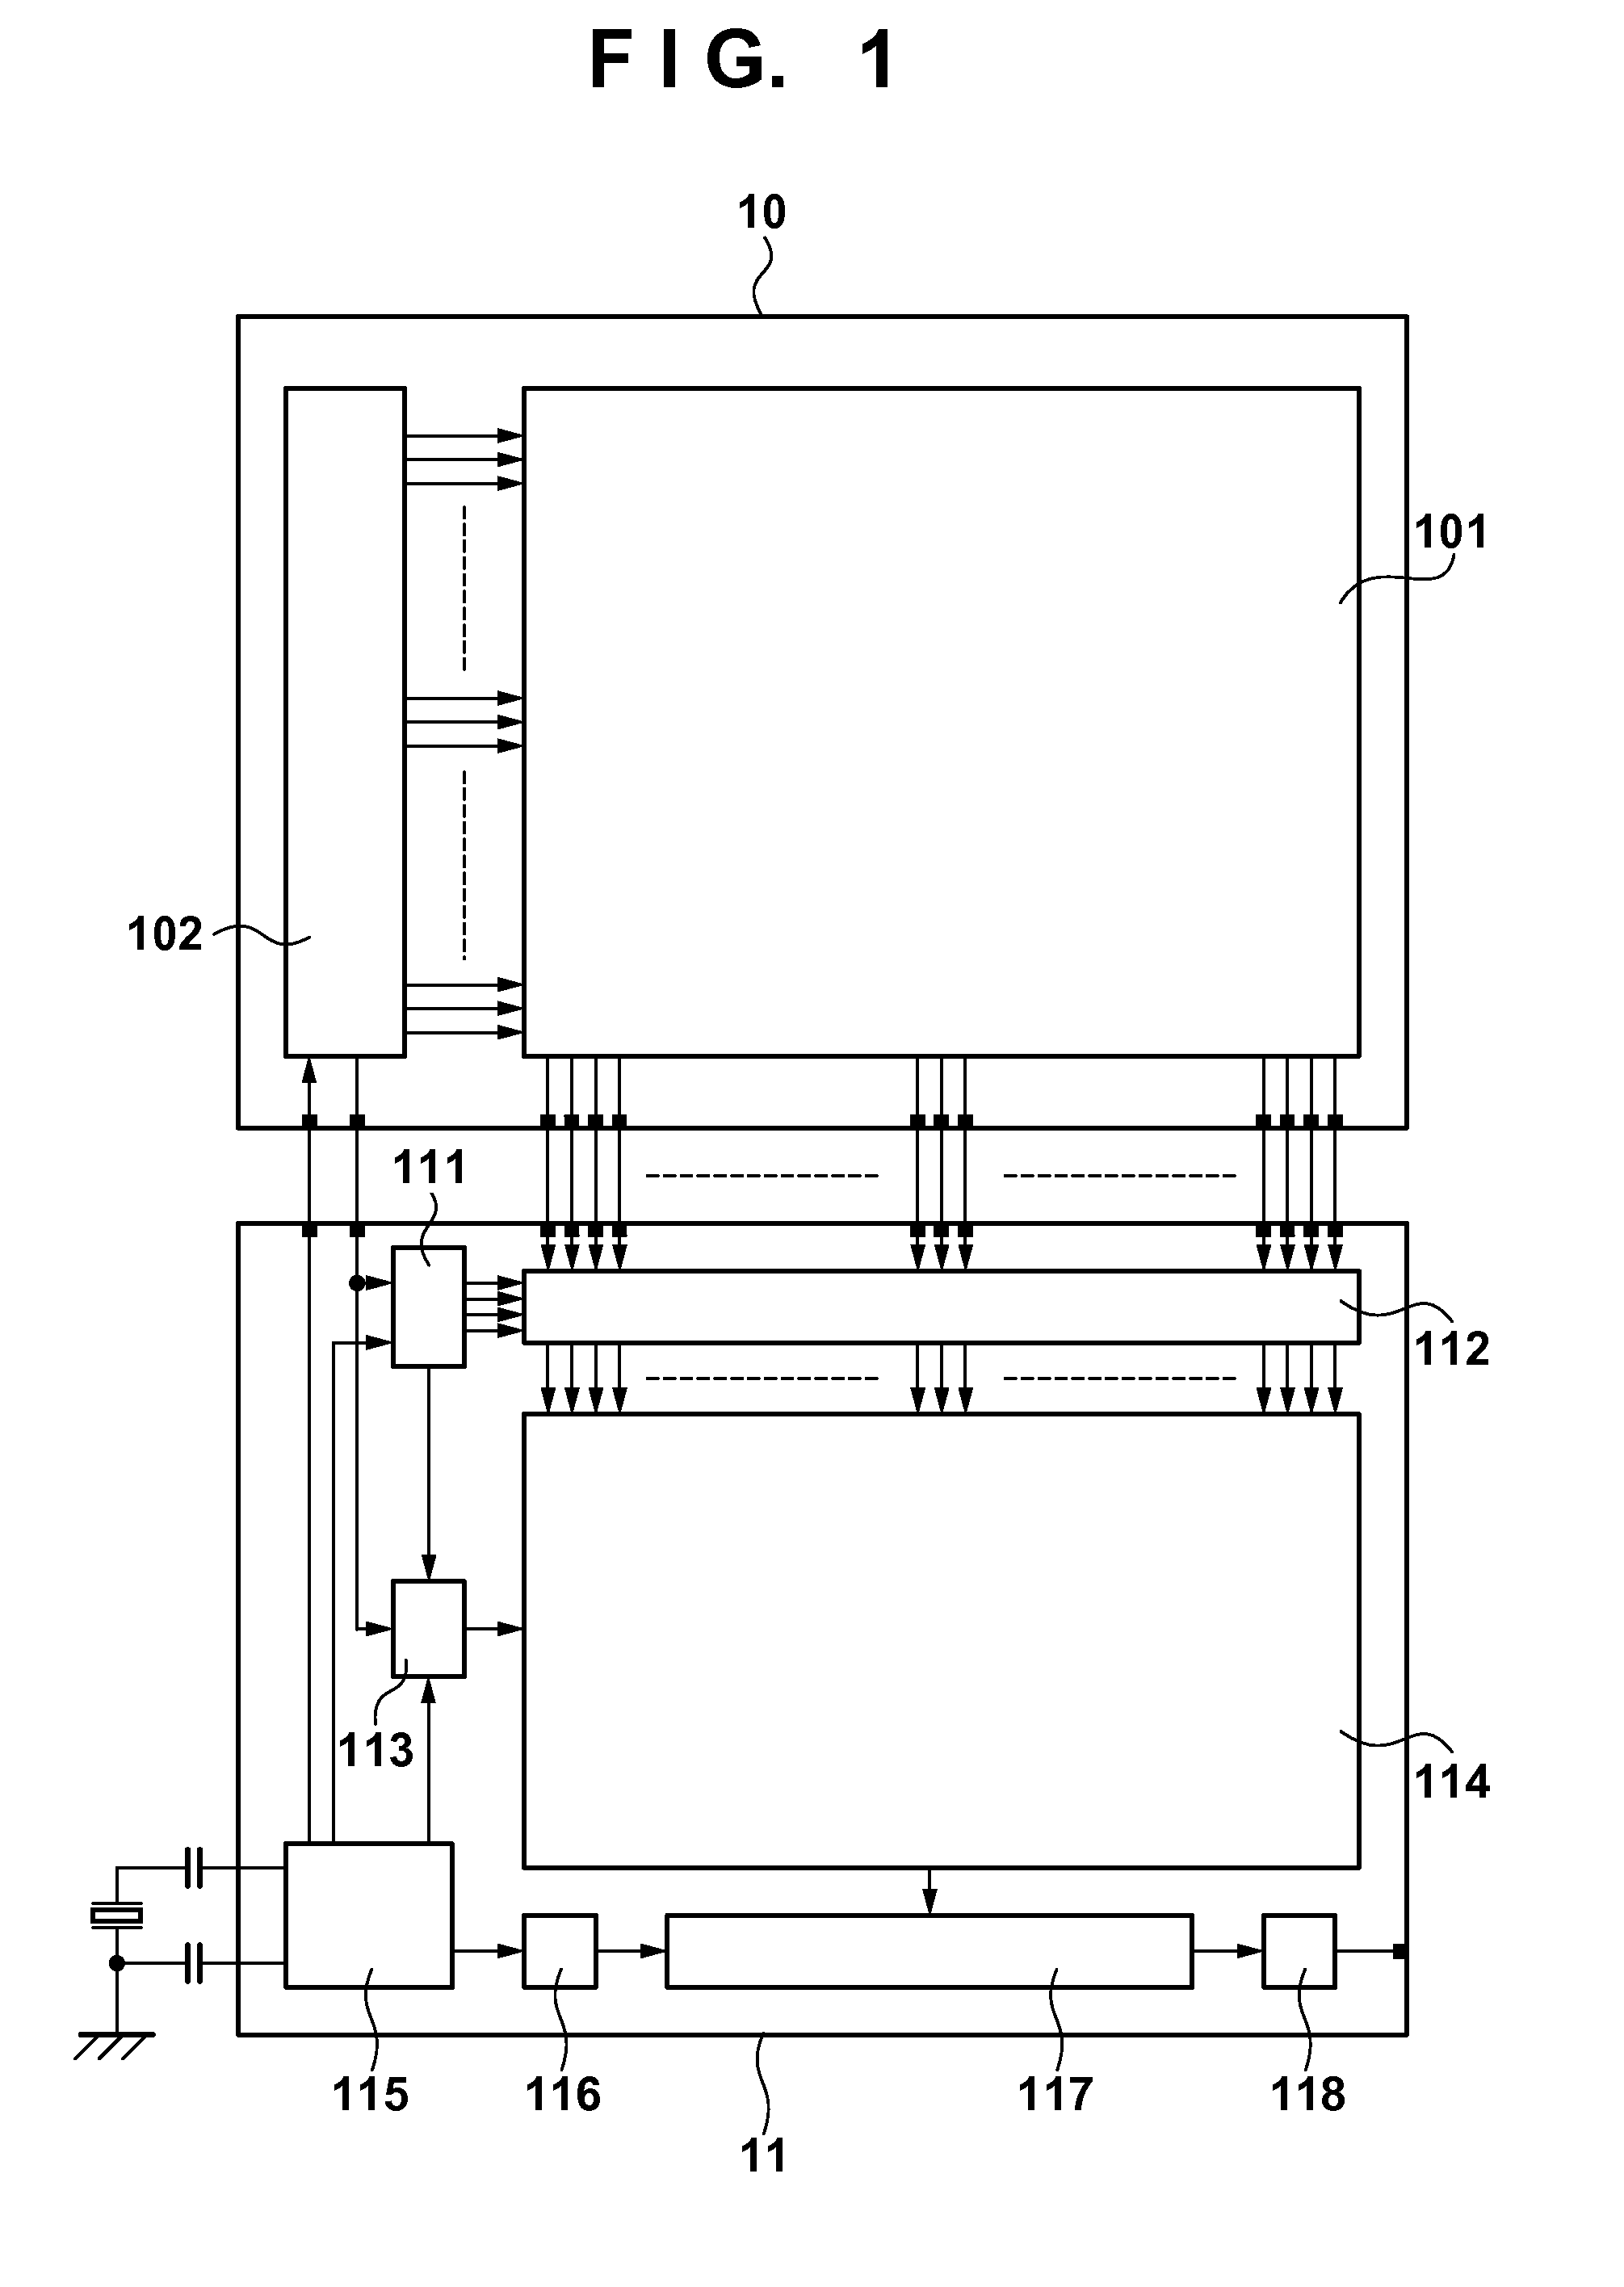 Solid-state image sensor, method of controlling the same, electronic device, and storage medium